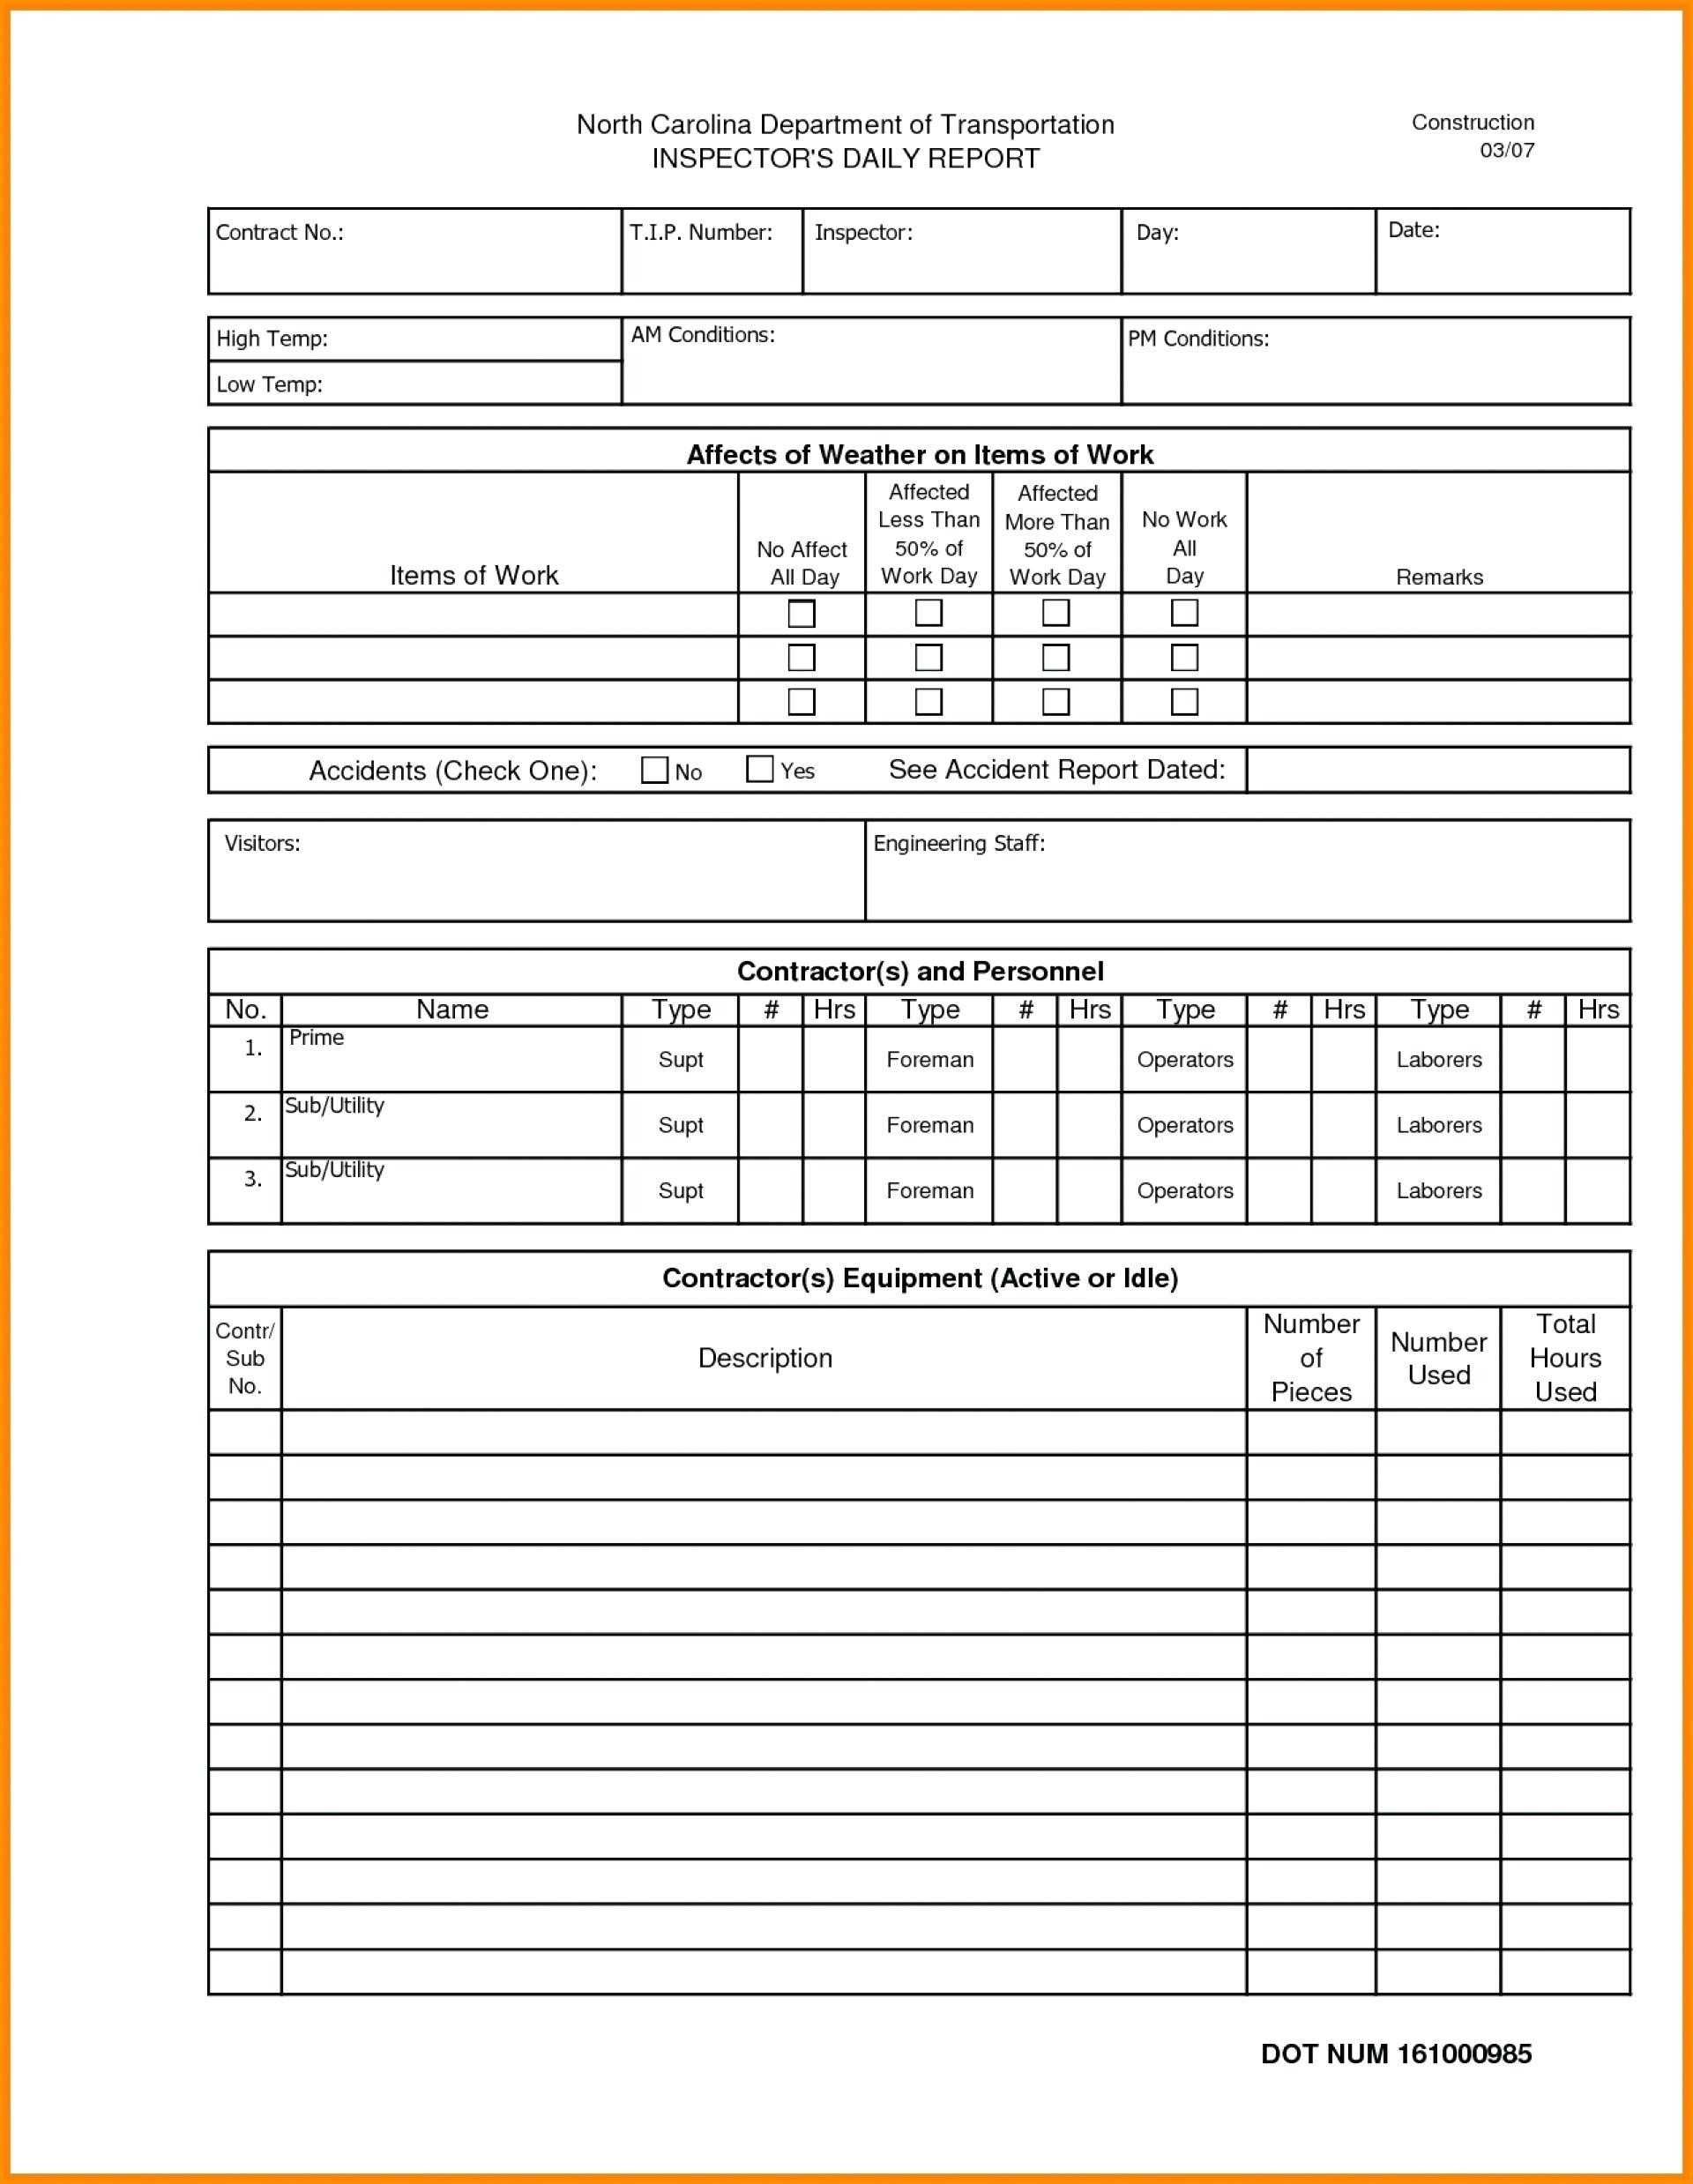 027 Construction Cost Report Template Excel Of Beautiful With Construction Cost Report Template